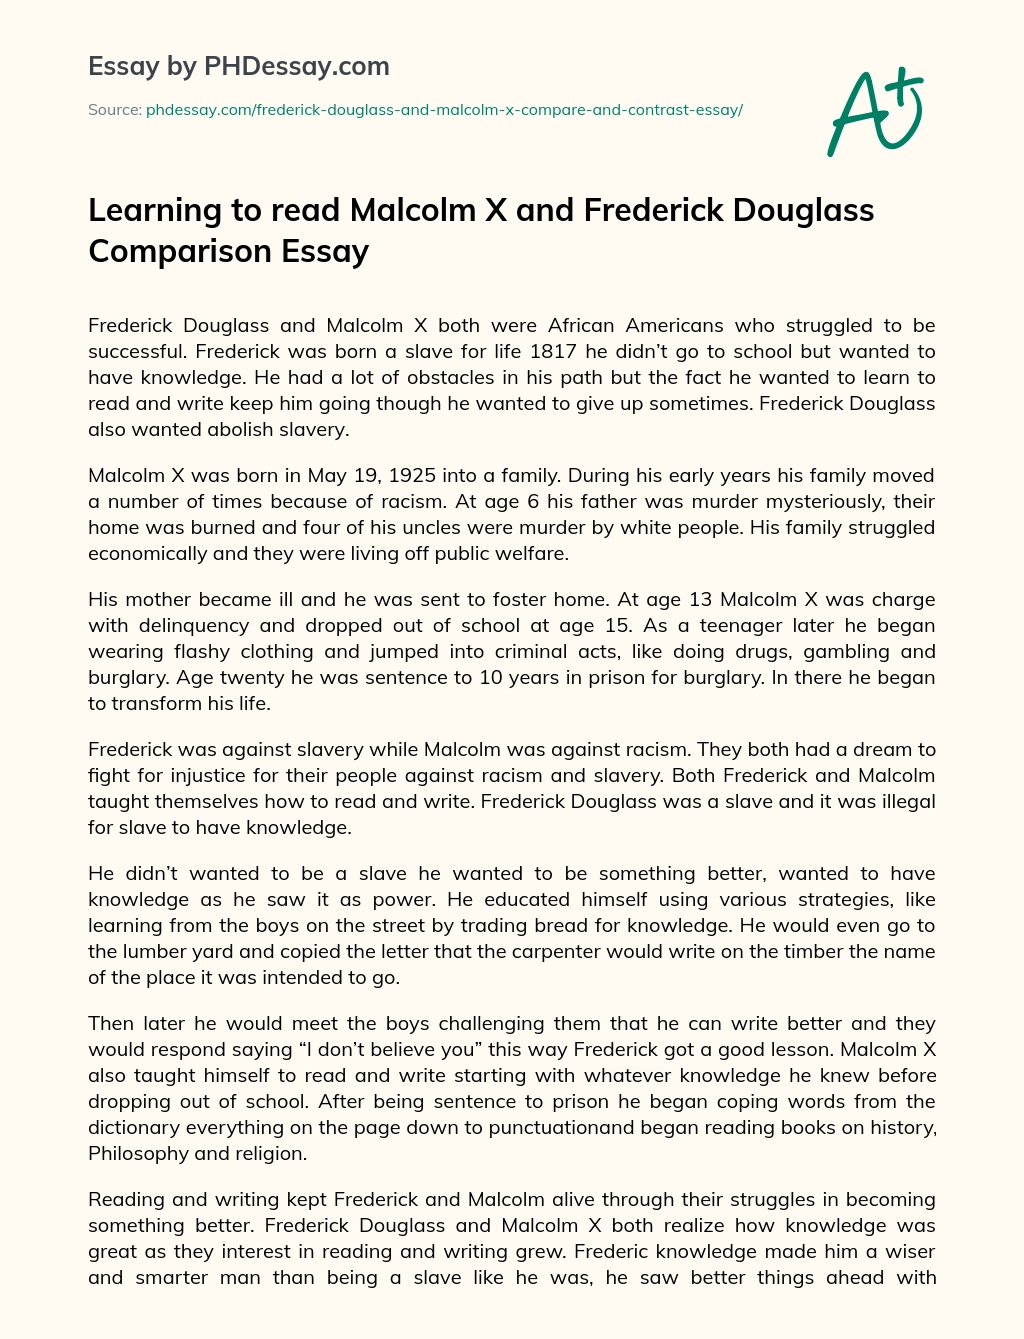 Learning to read Malcolm X and Frederick Douglass Comparison Essay essay